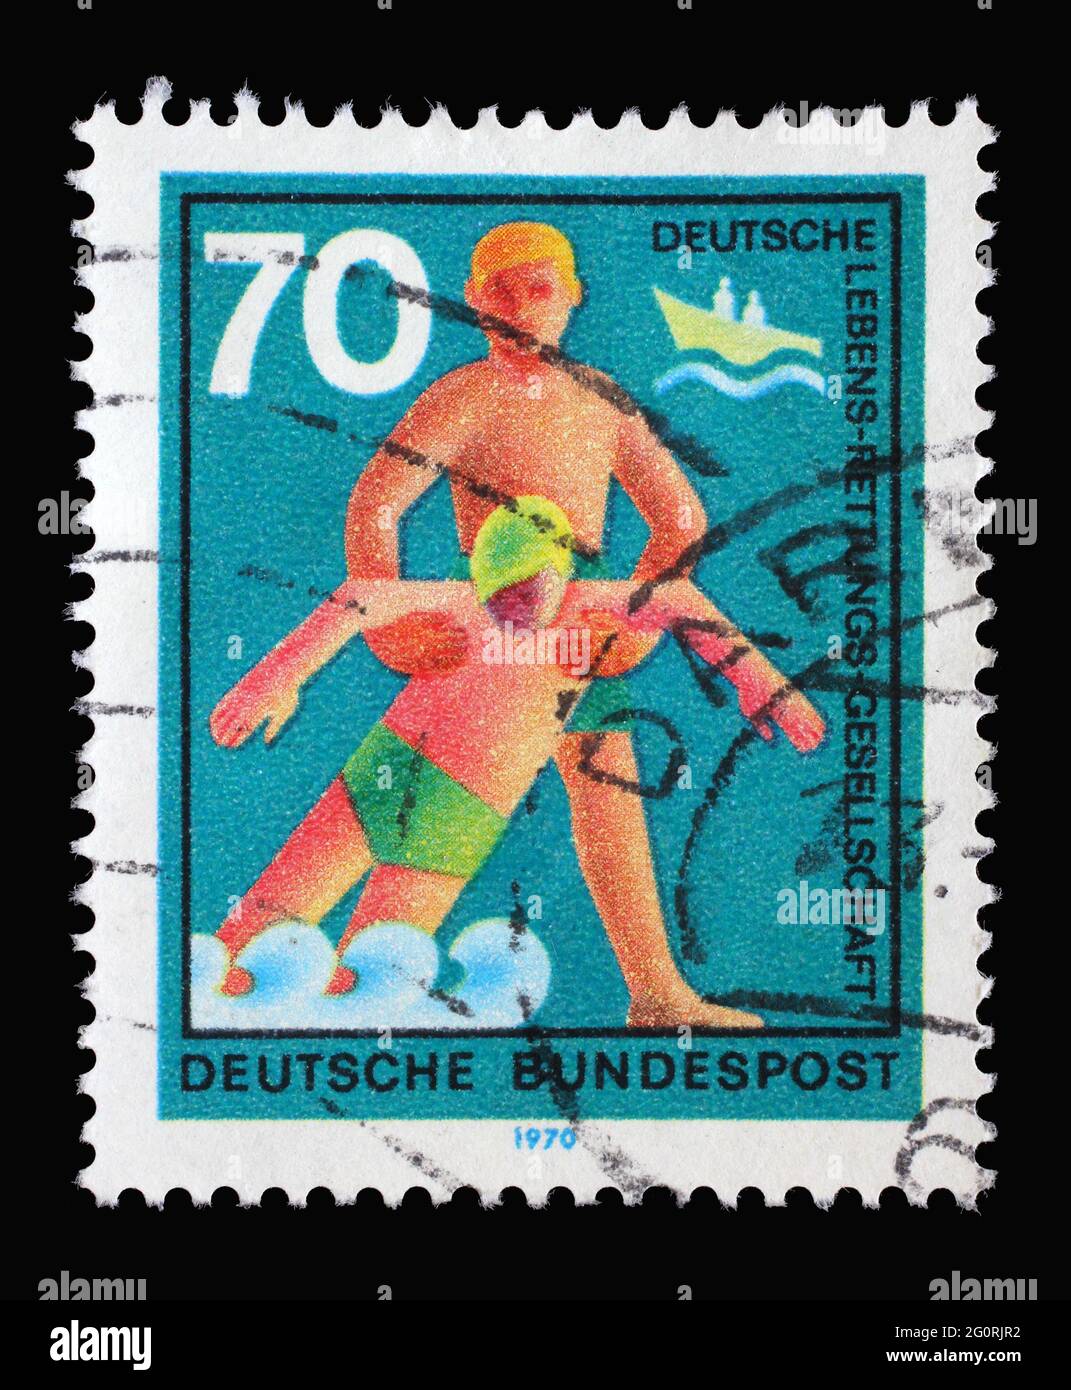 Stamp printed in Germany showing a rescuer pulls injuries out of the water, Voluntary help service lifesaving, circa 1970 Stock Photo